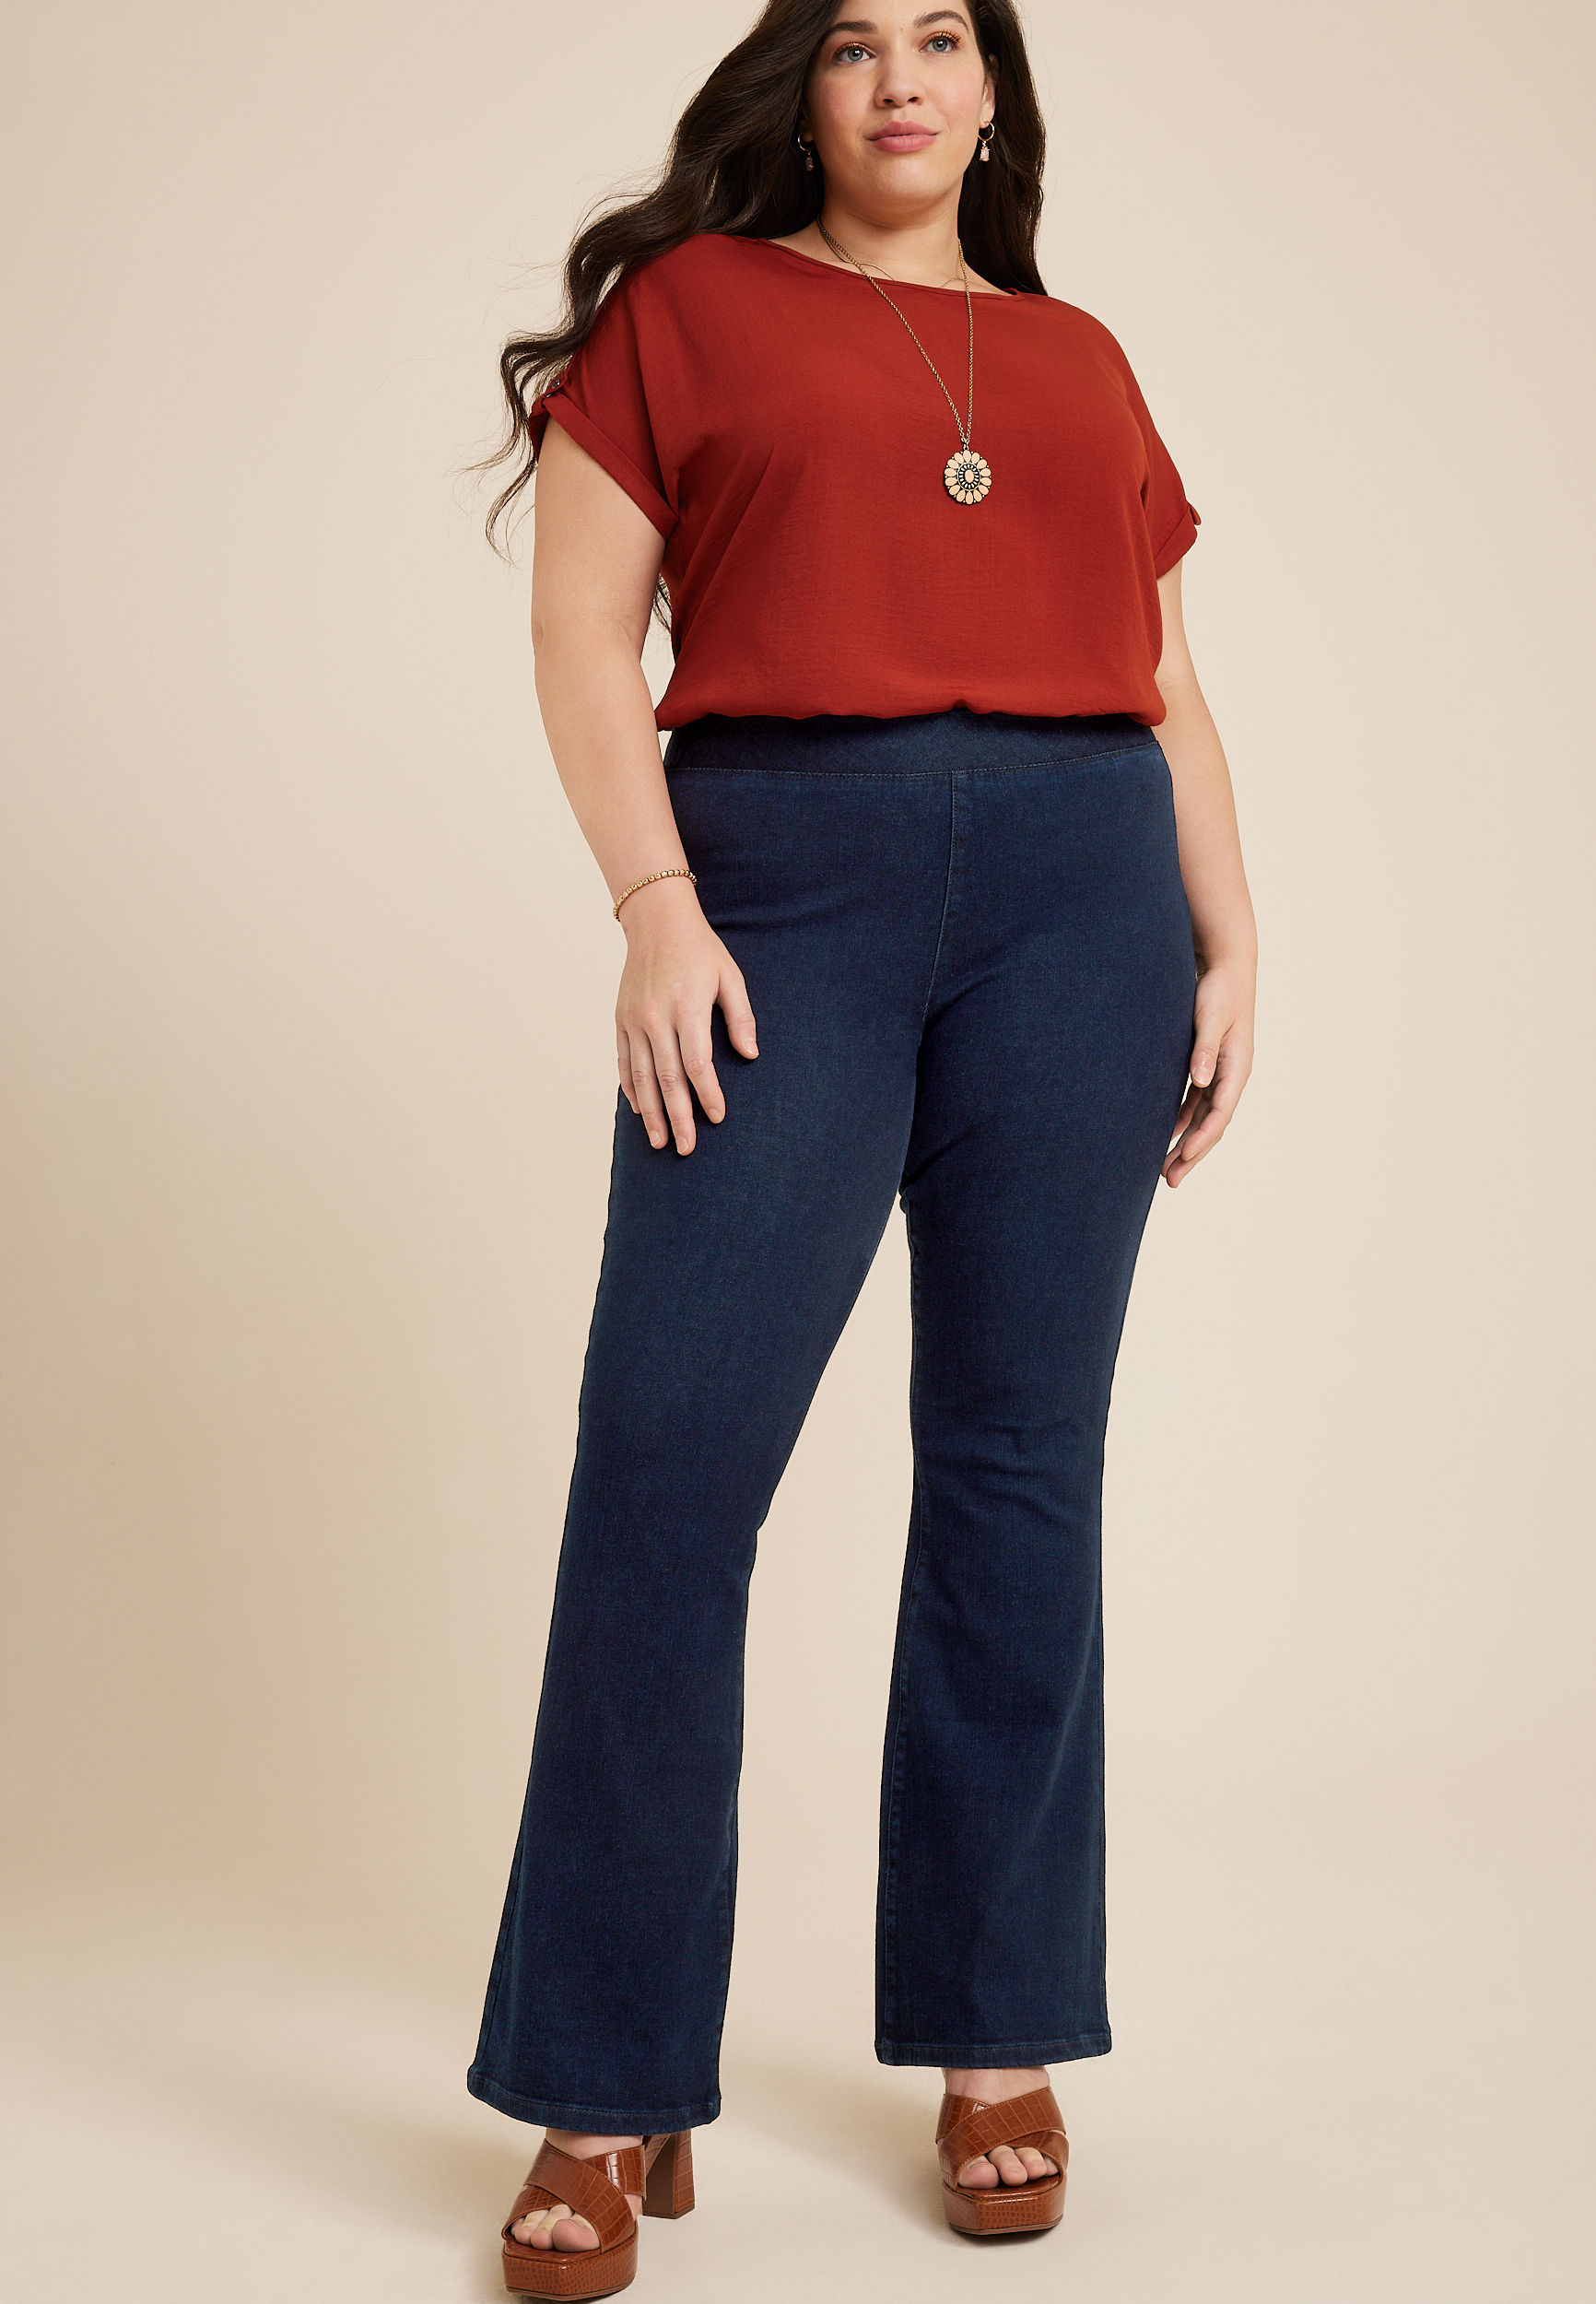 Plus Size m jeans by maurices™ Flare Sleek Pull On High Rise Jean ...